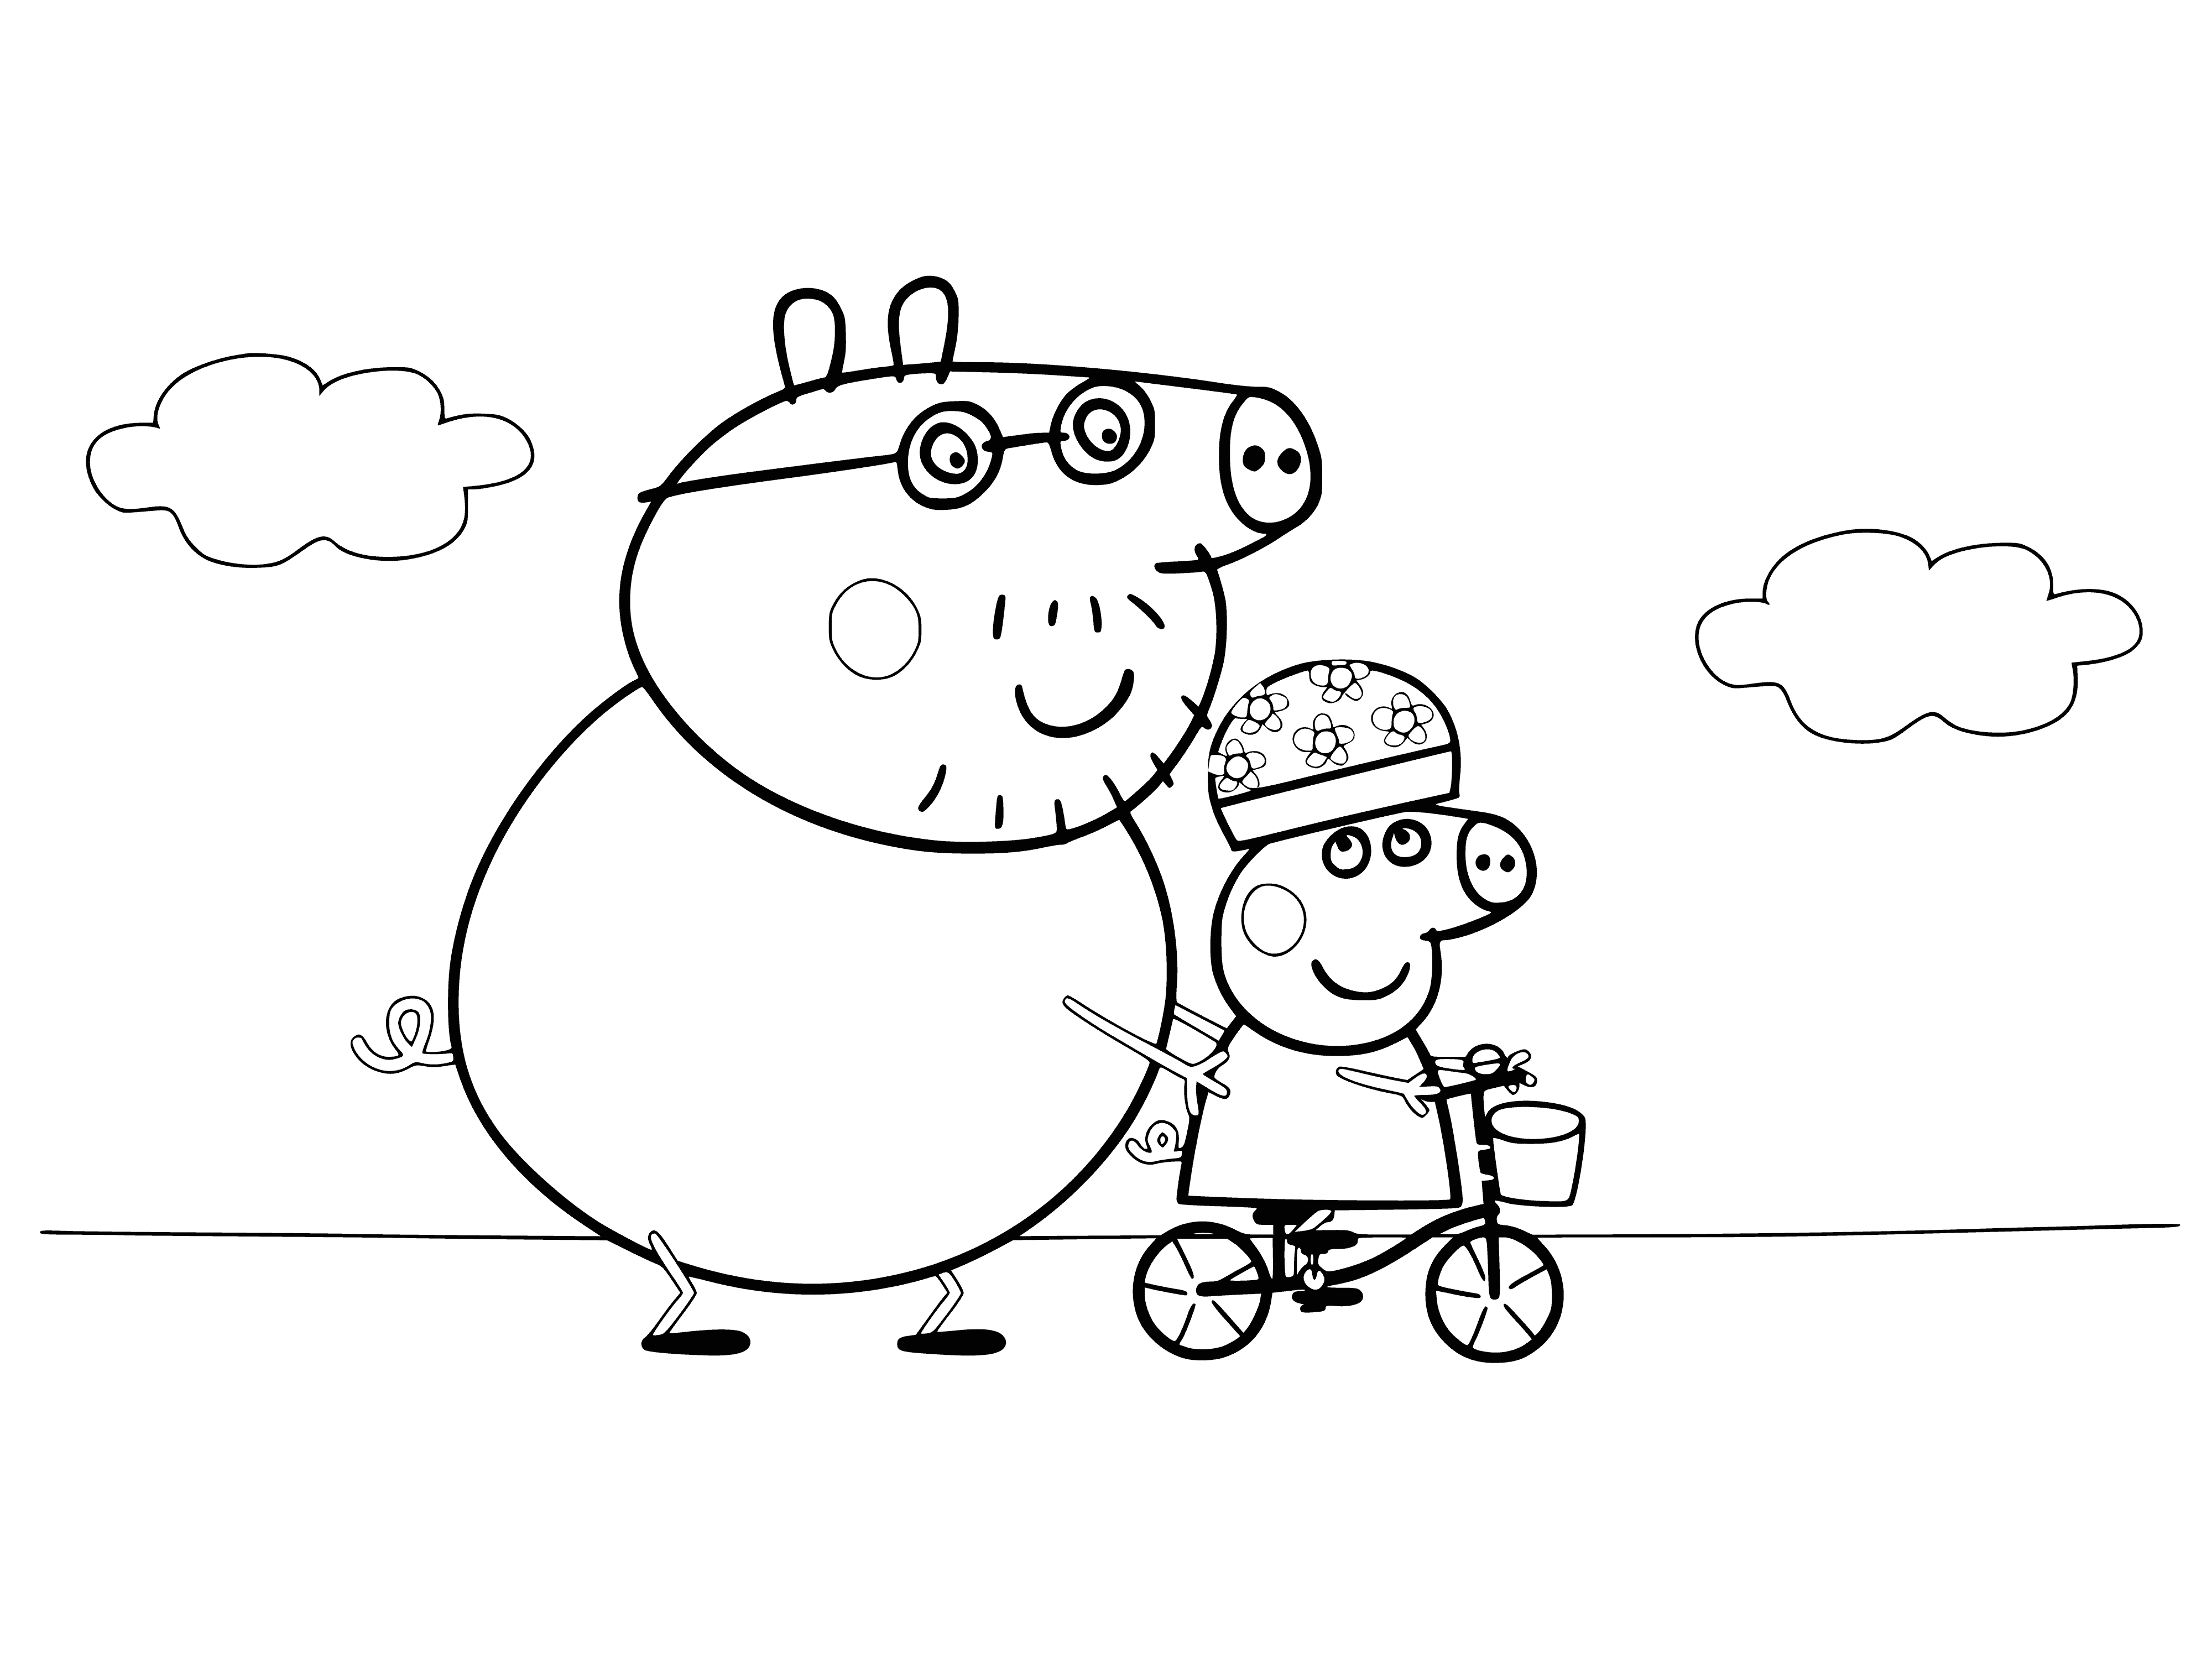 coloring page: Four-year-old girl in pink dress and helmet sits on bike, happy as can be, hands on handlebars and feet on peddles. #RidingInStyle